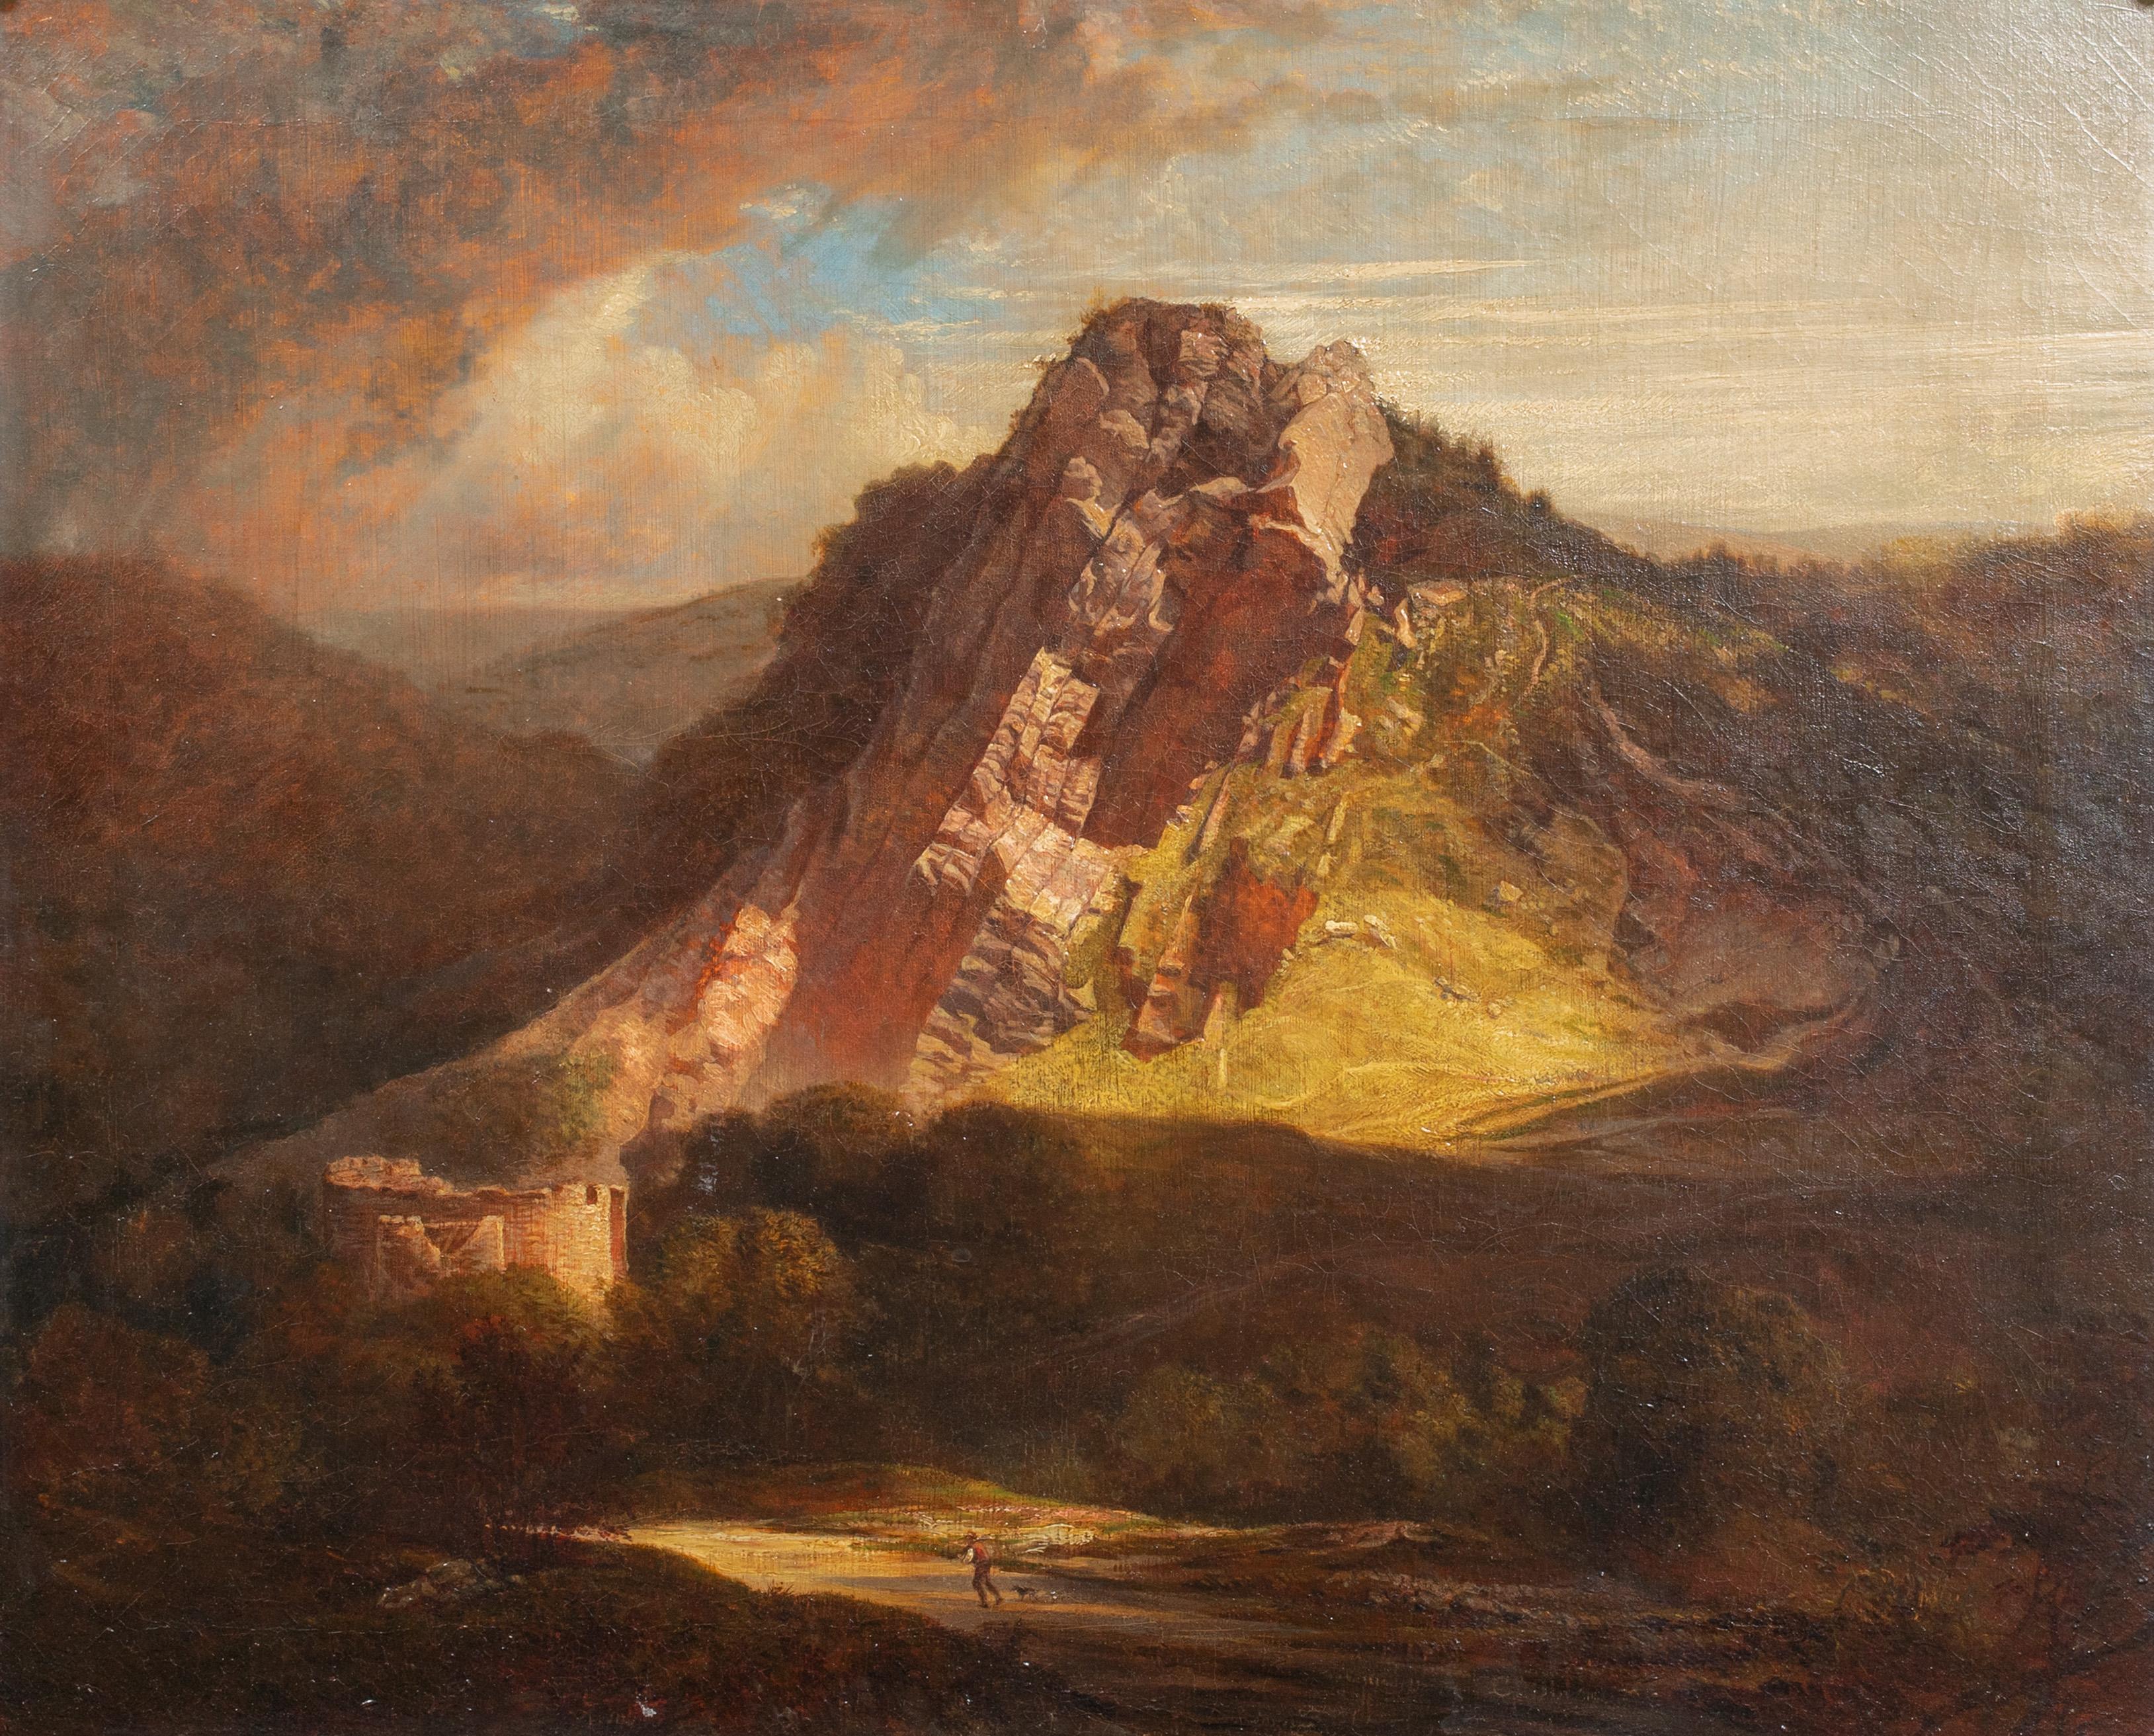 Francis Danby Landscape Painting - Lonely Figure In A Mountain Landscape, titled "Dinas Braun Neath", 19th Century 